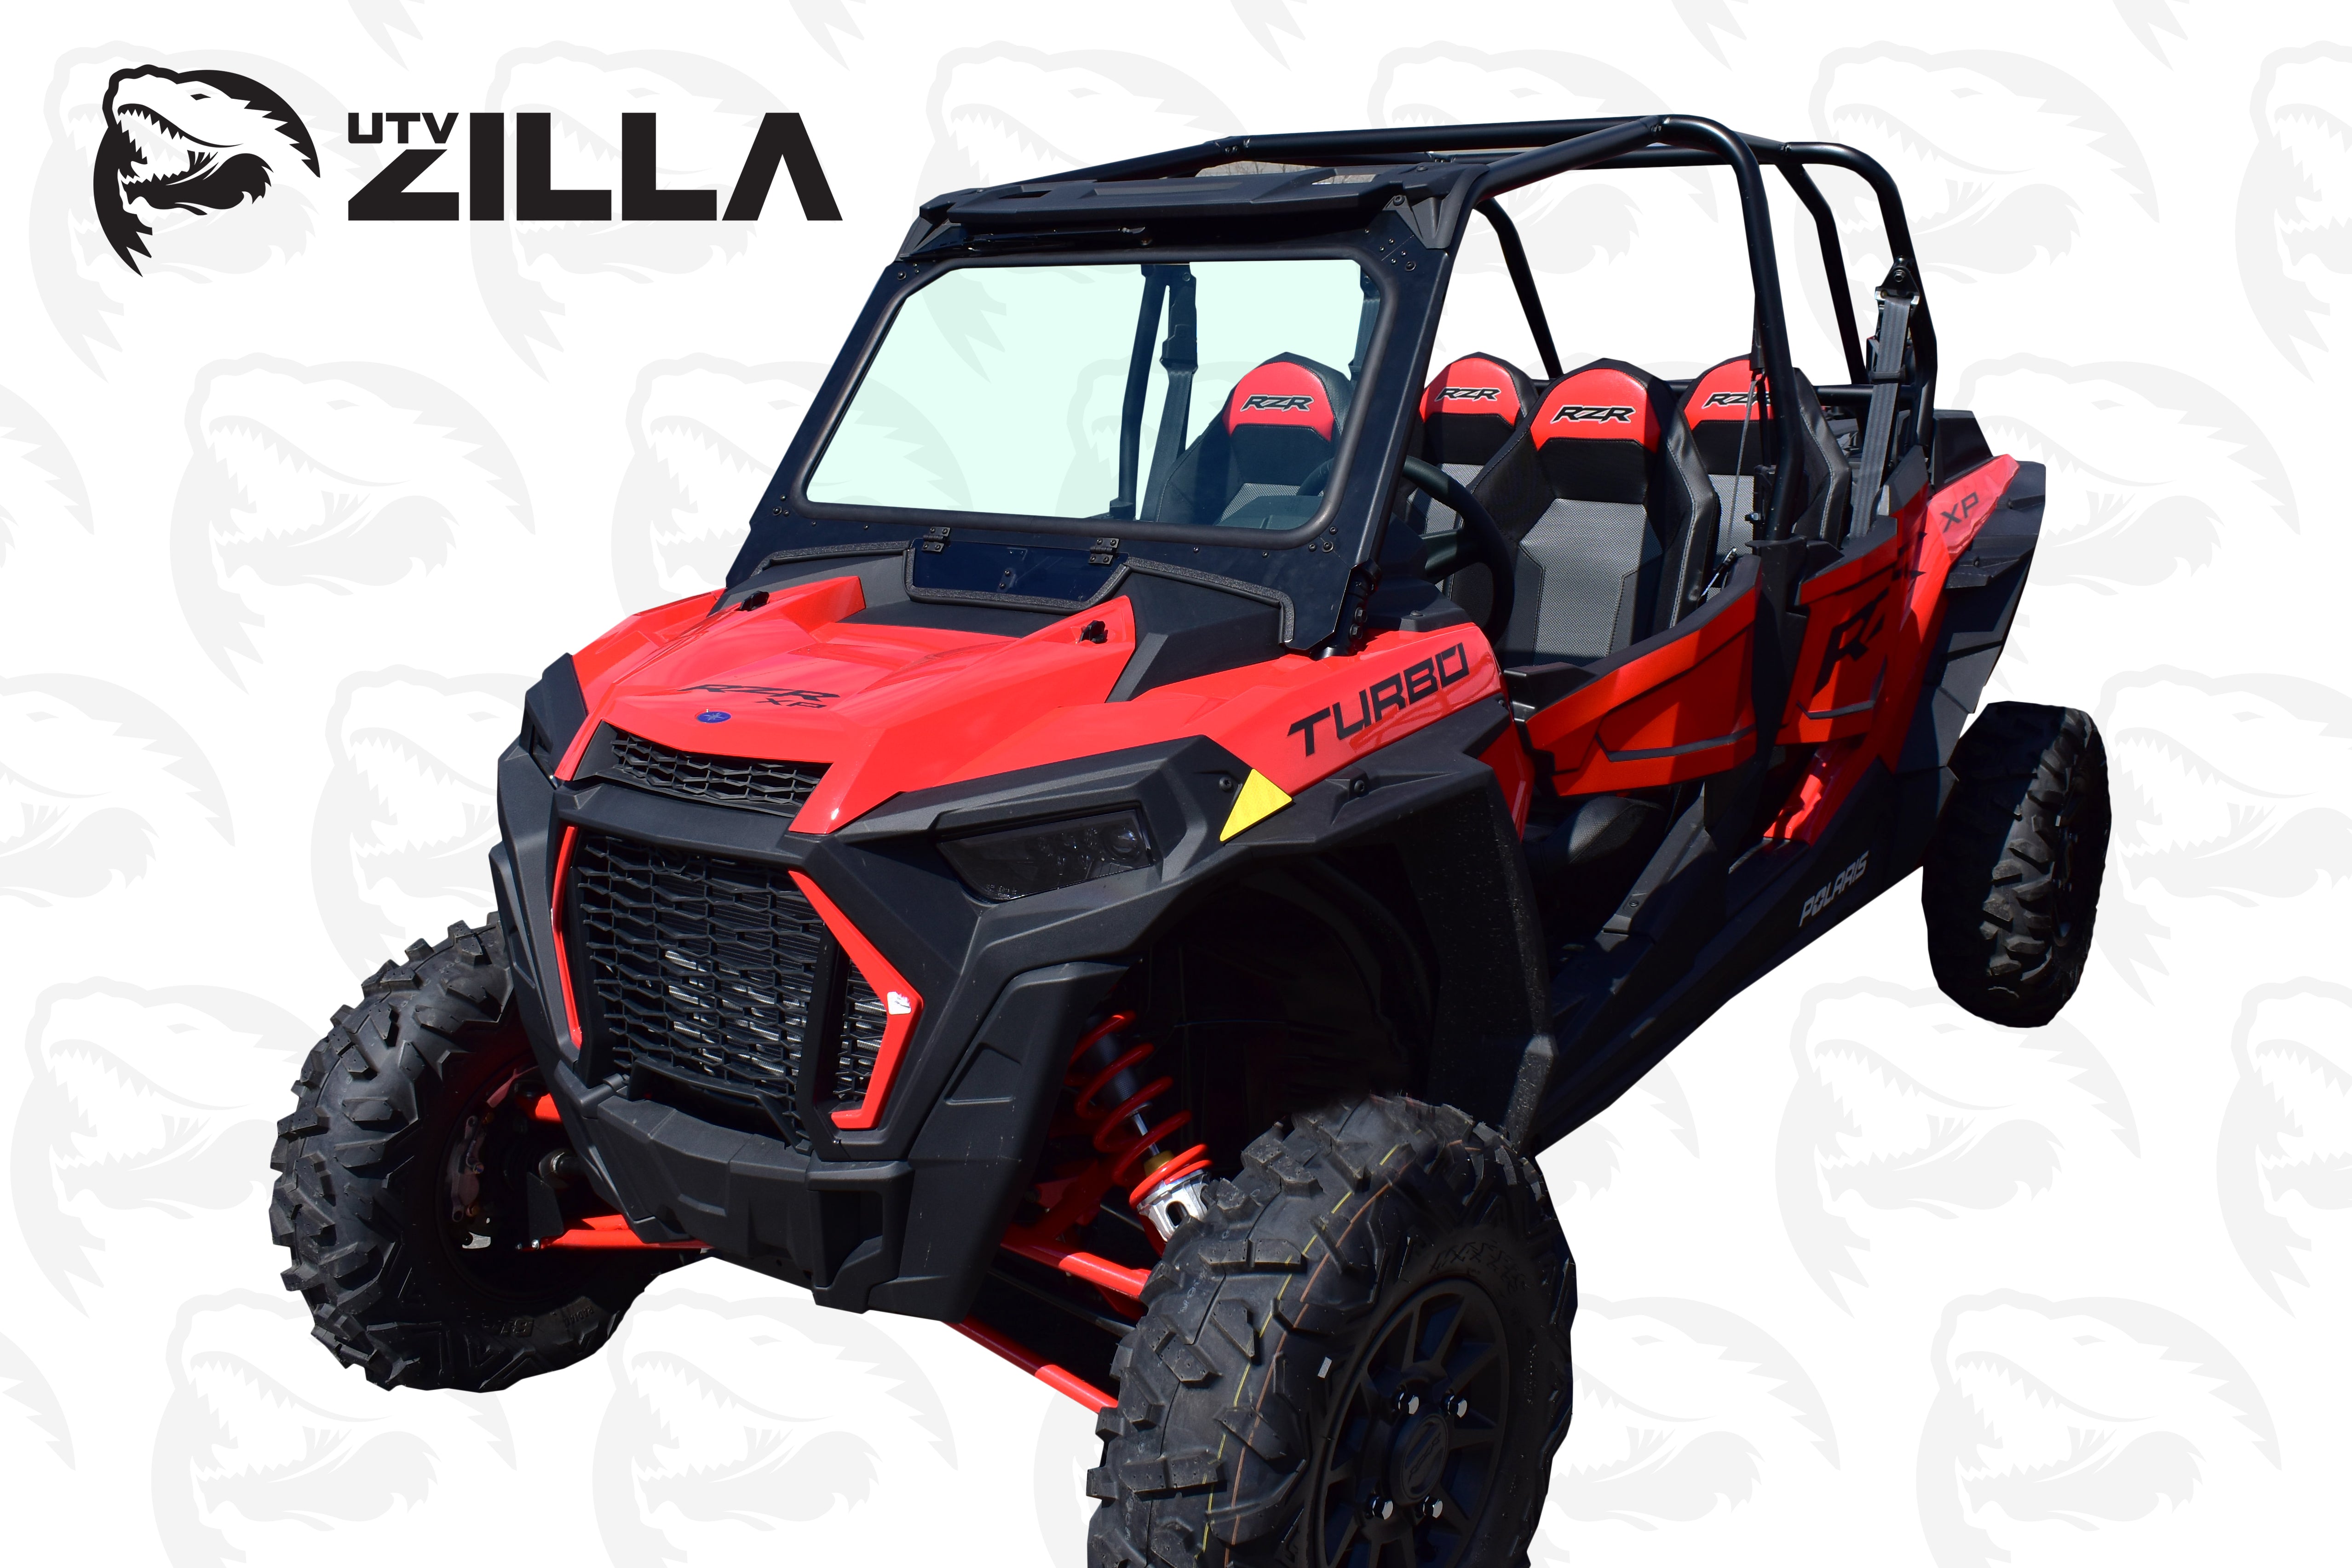 RED Vented Glass Windshield for 2019 RZR with Wiper